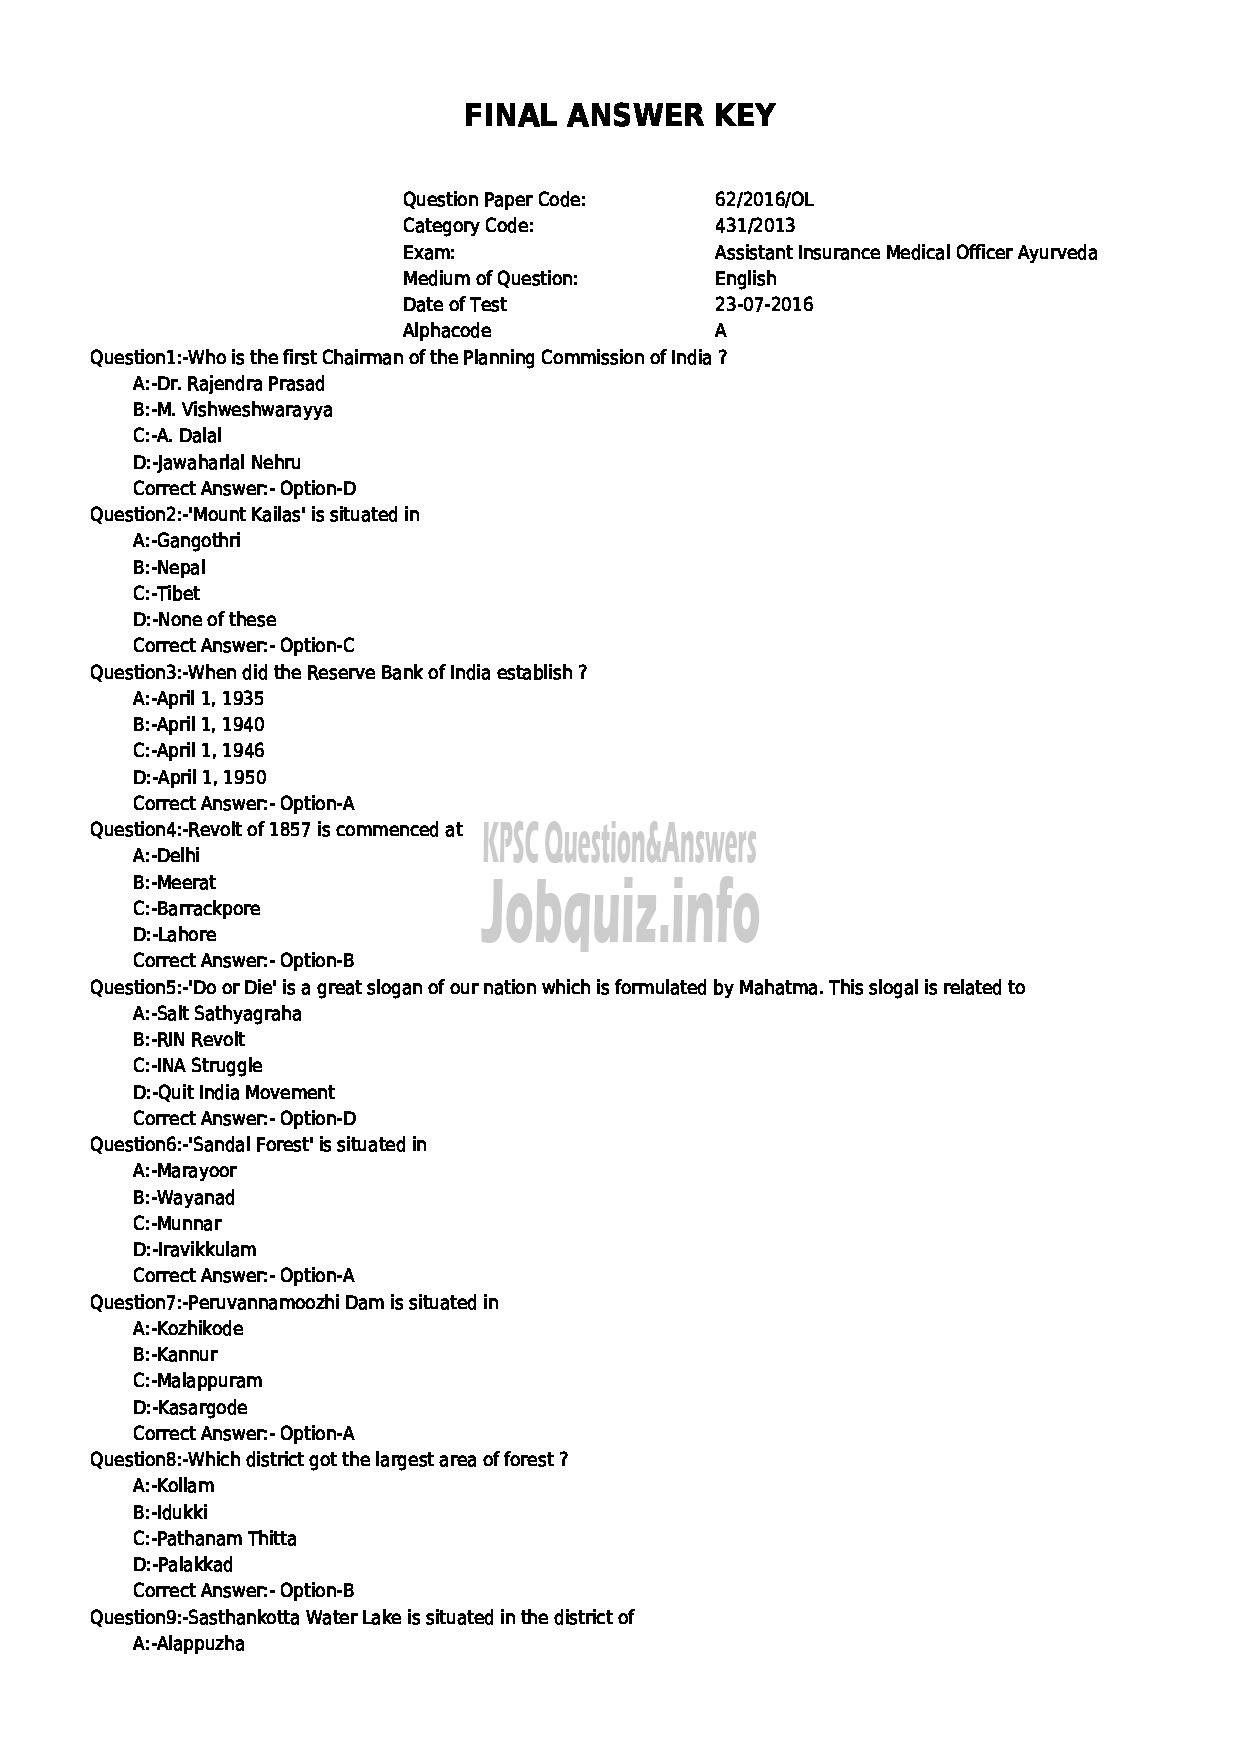 Kerala PSC Question Paper - ASSISTANT INSURANCE MEDICAL OFFICER AYURVEDA-1